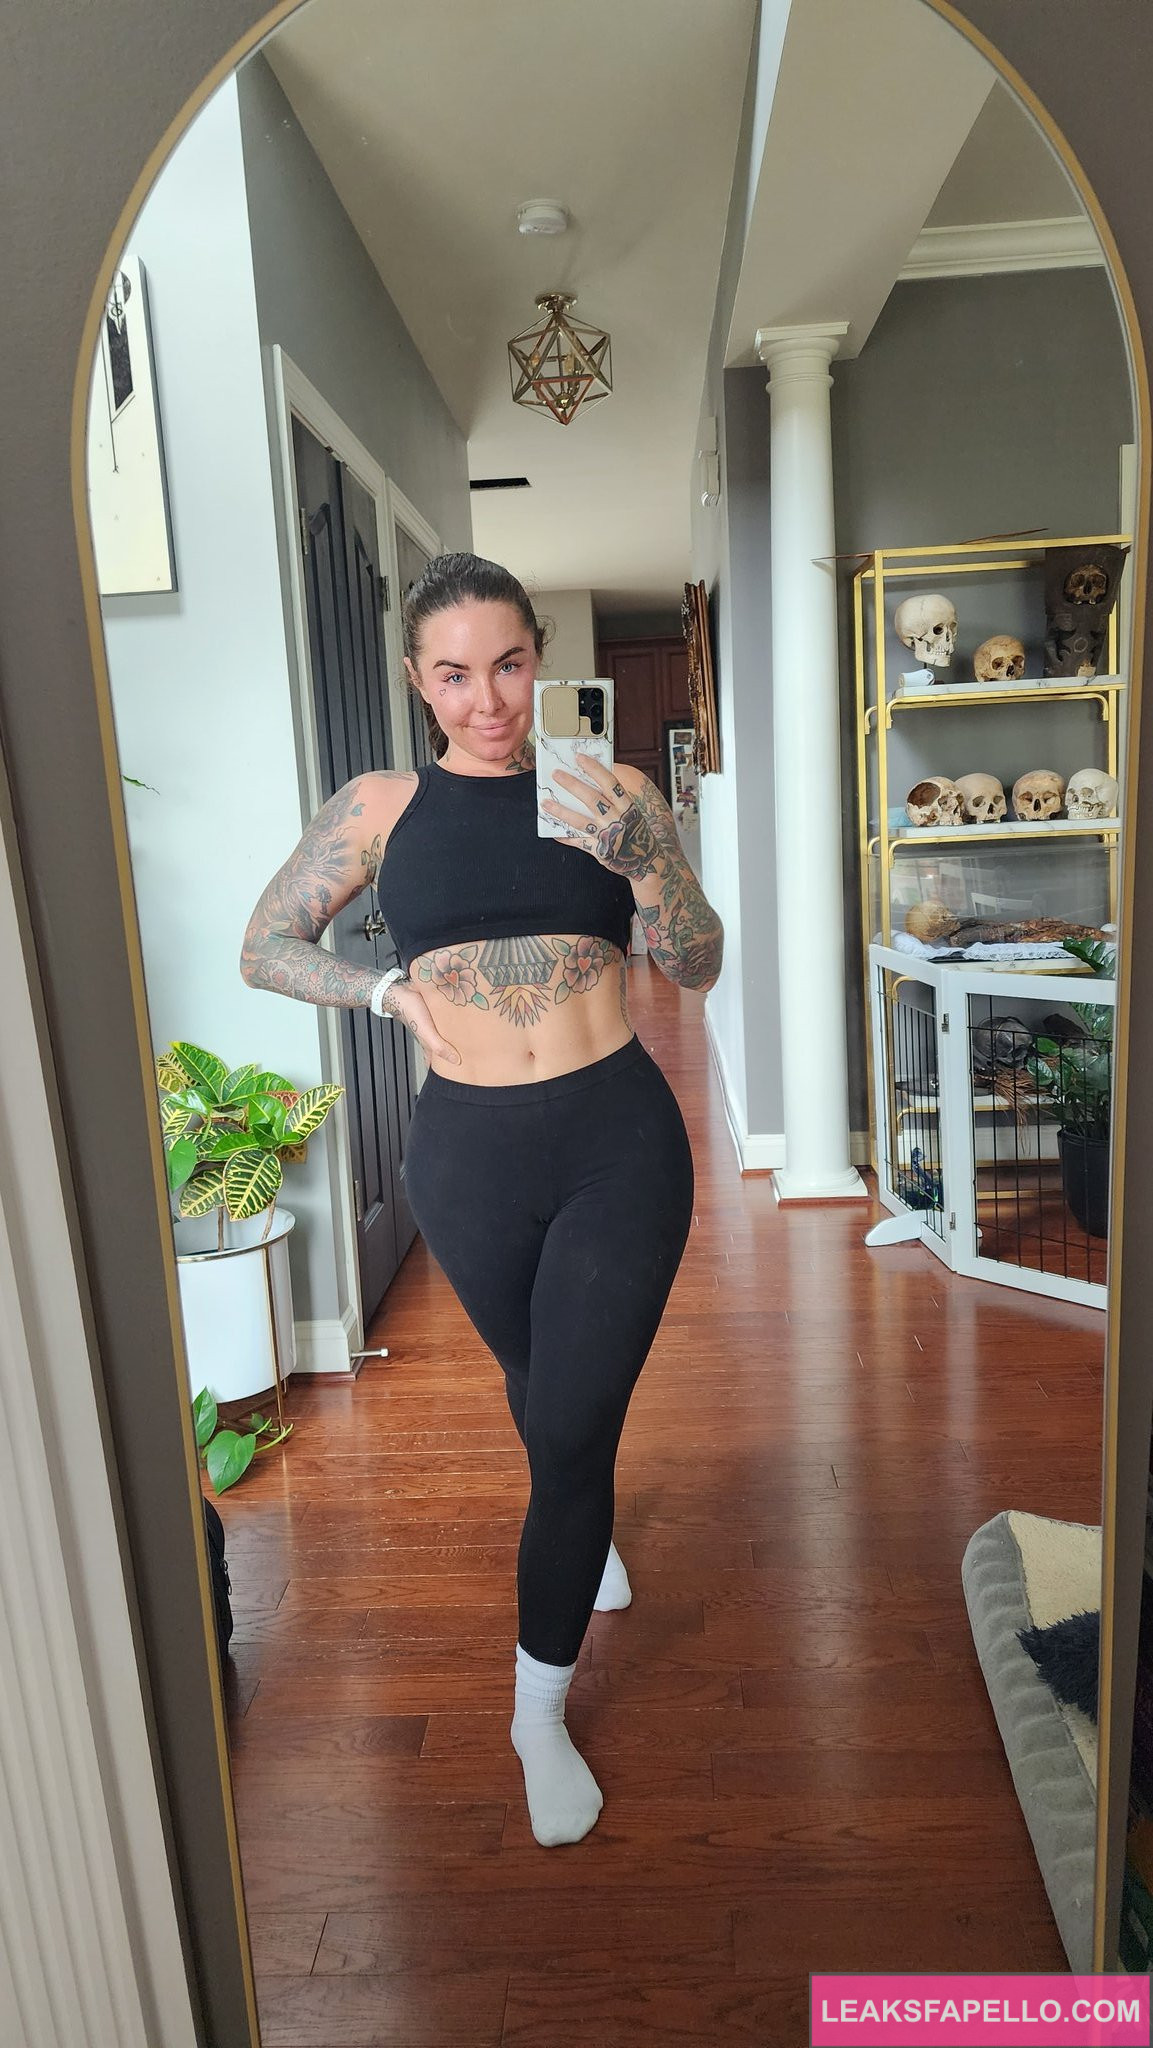 Christy Mack @christymack OnlyFans big tits tattooed curvy only fans model wearing black tops and leggings mirror shot